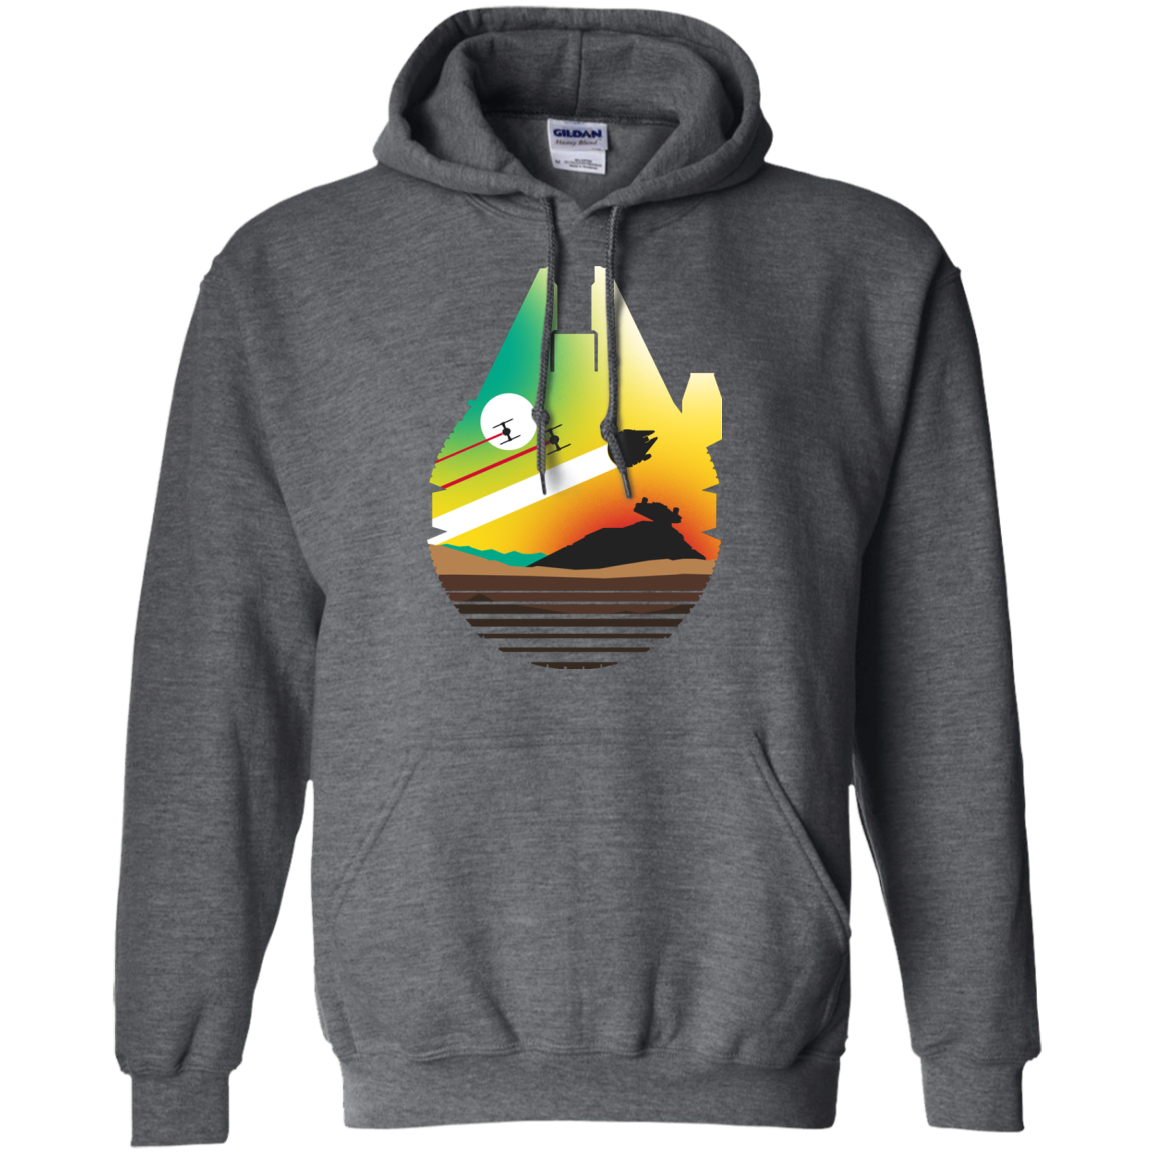 Escape from Desert Planet Pullover Hoodie